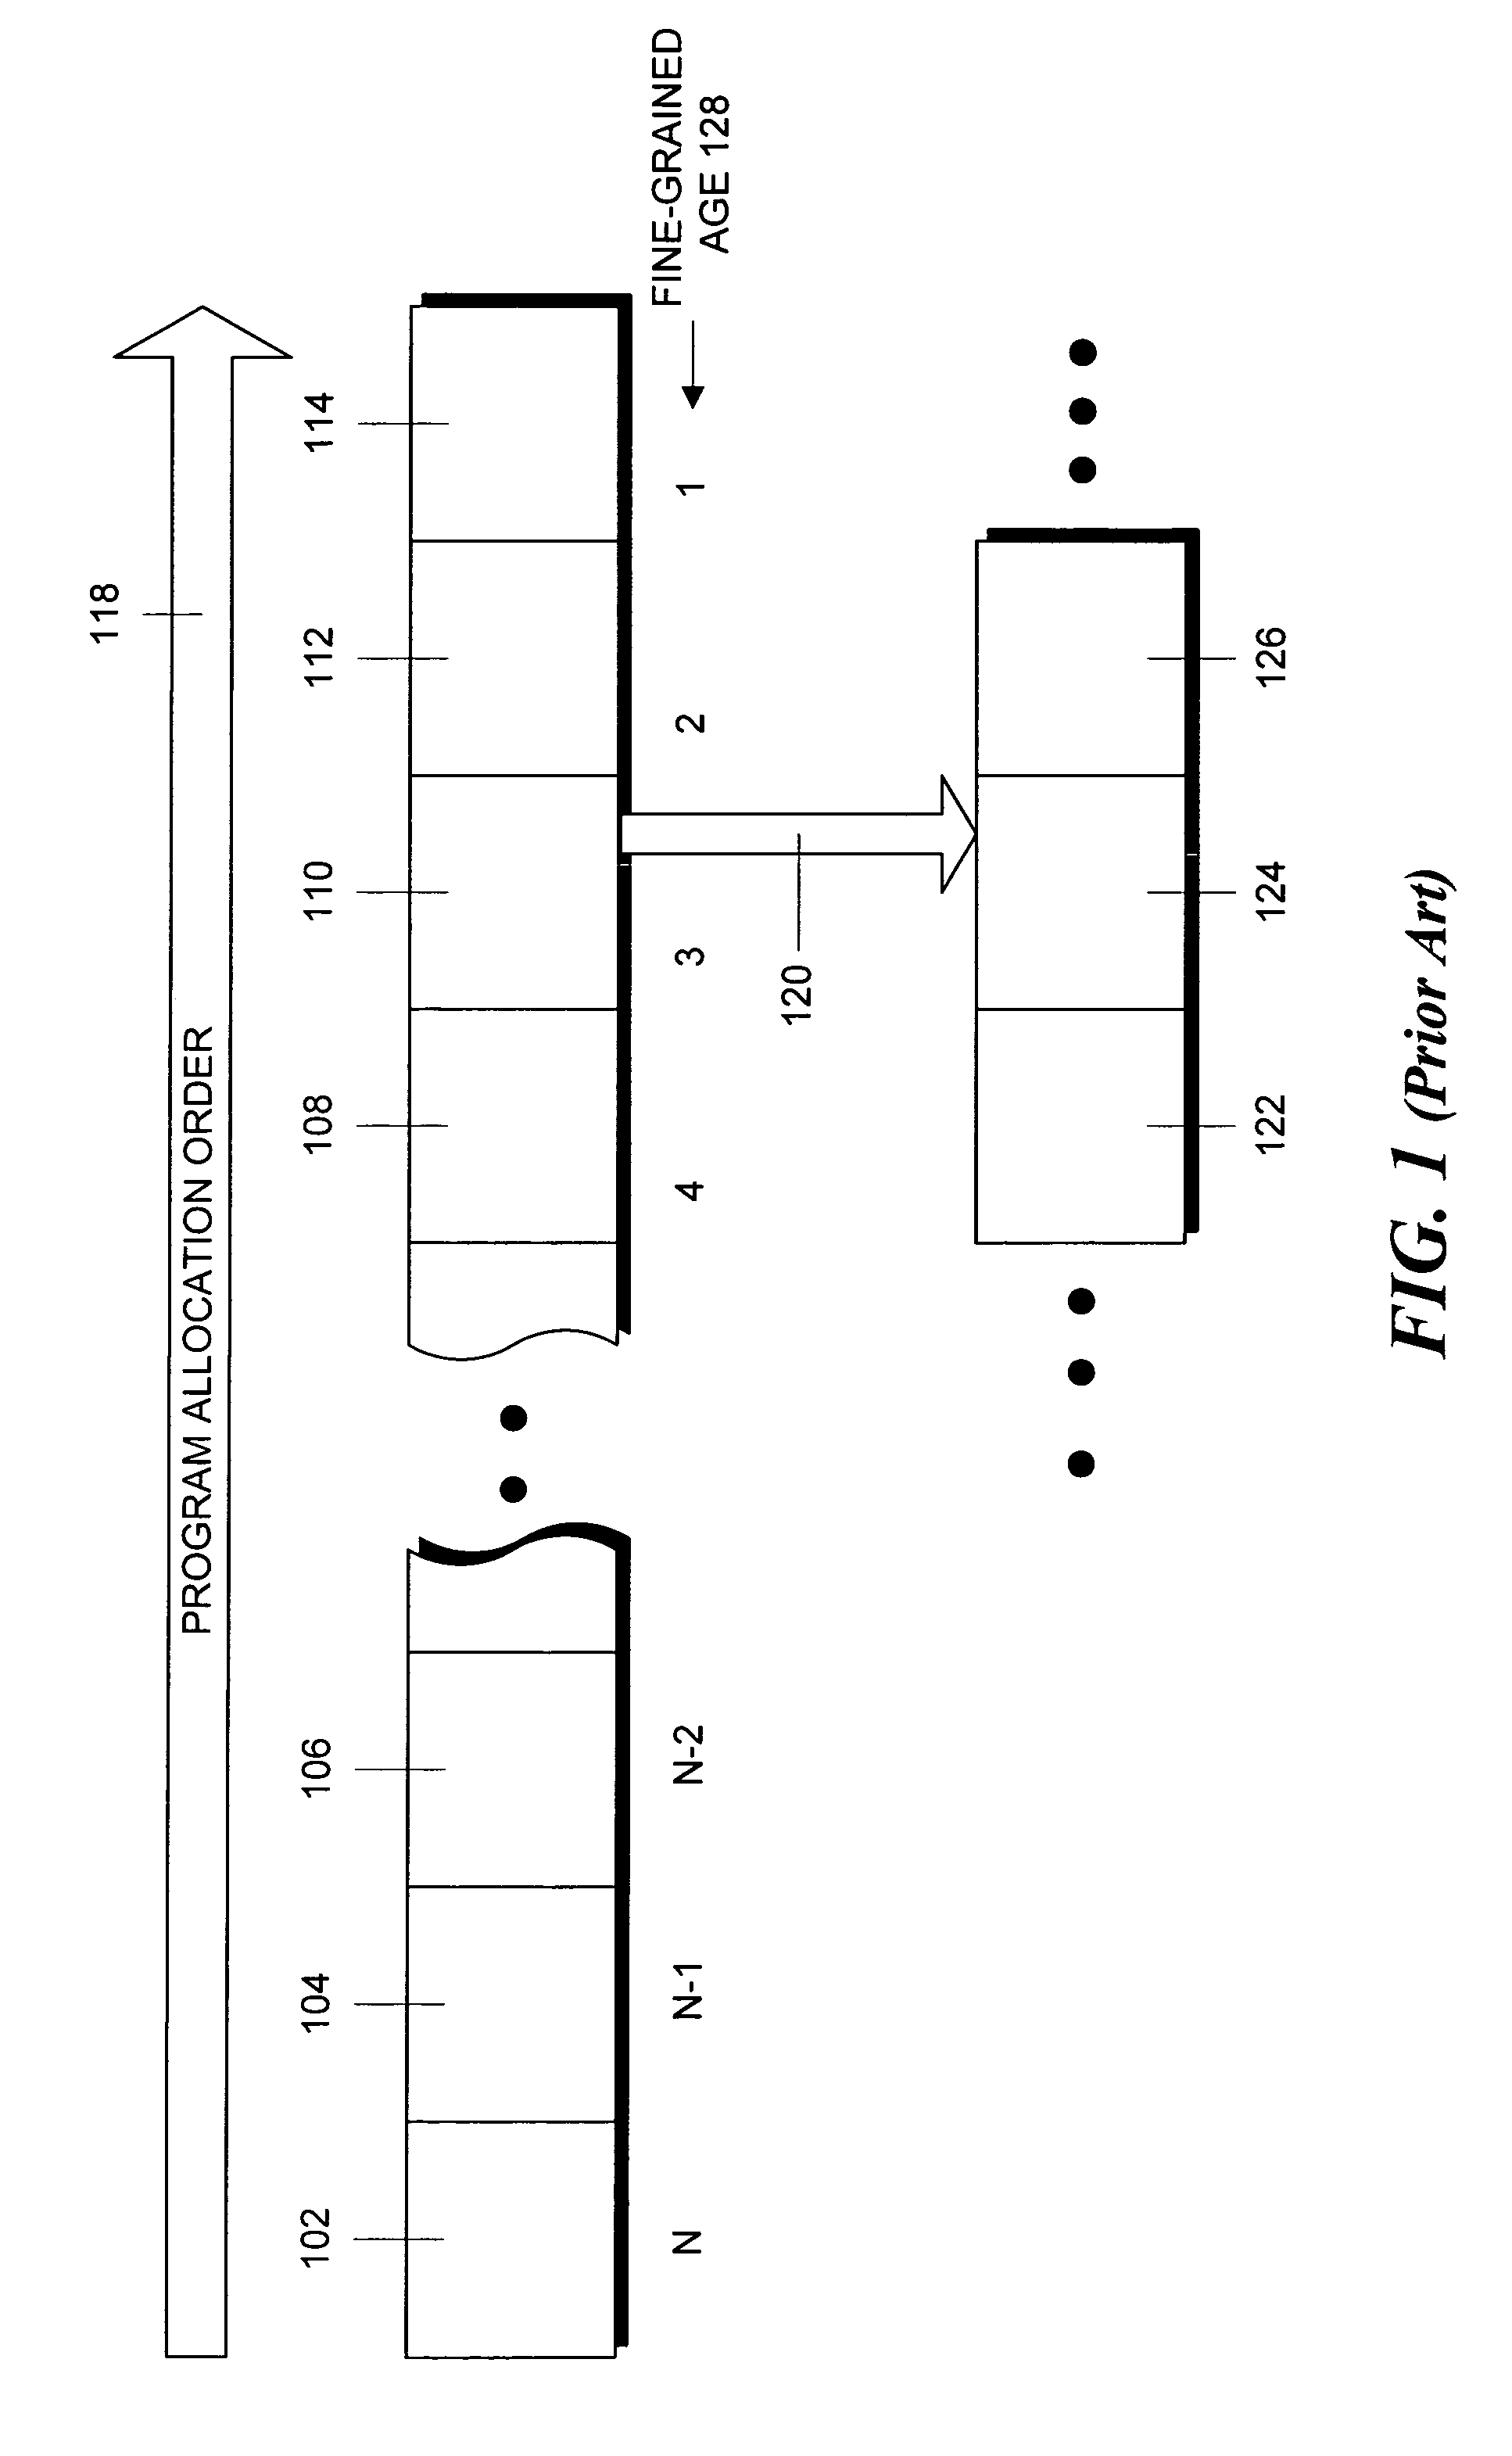 Method and apparatus for decreasing object copying by a generational, copying garbage collector